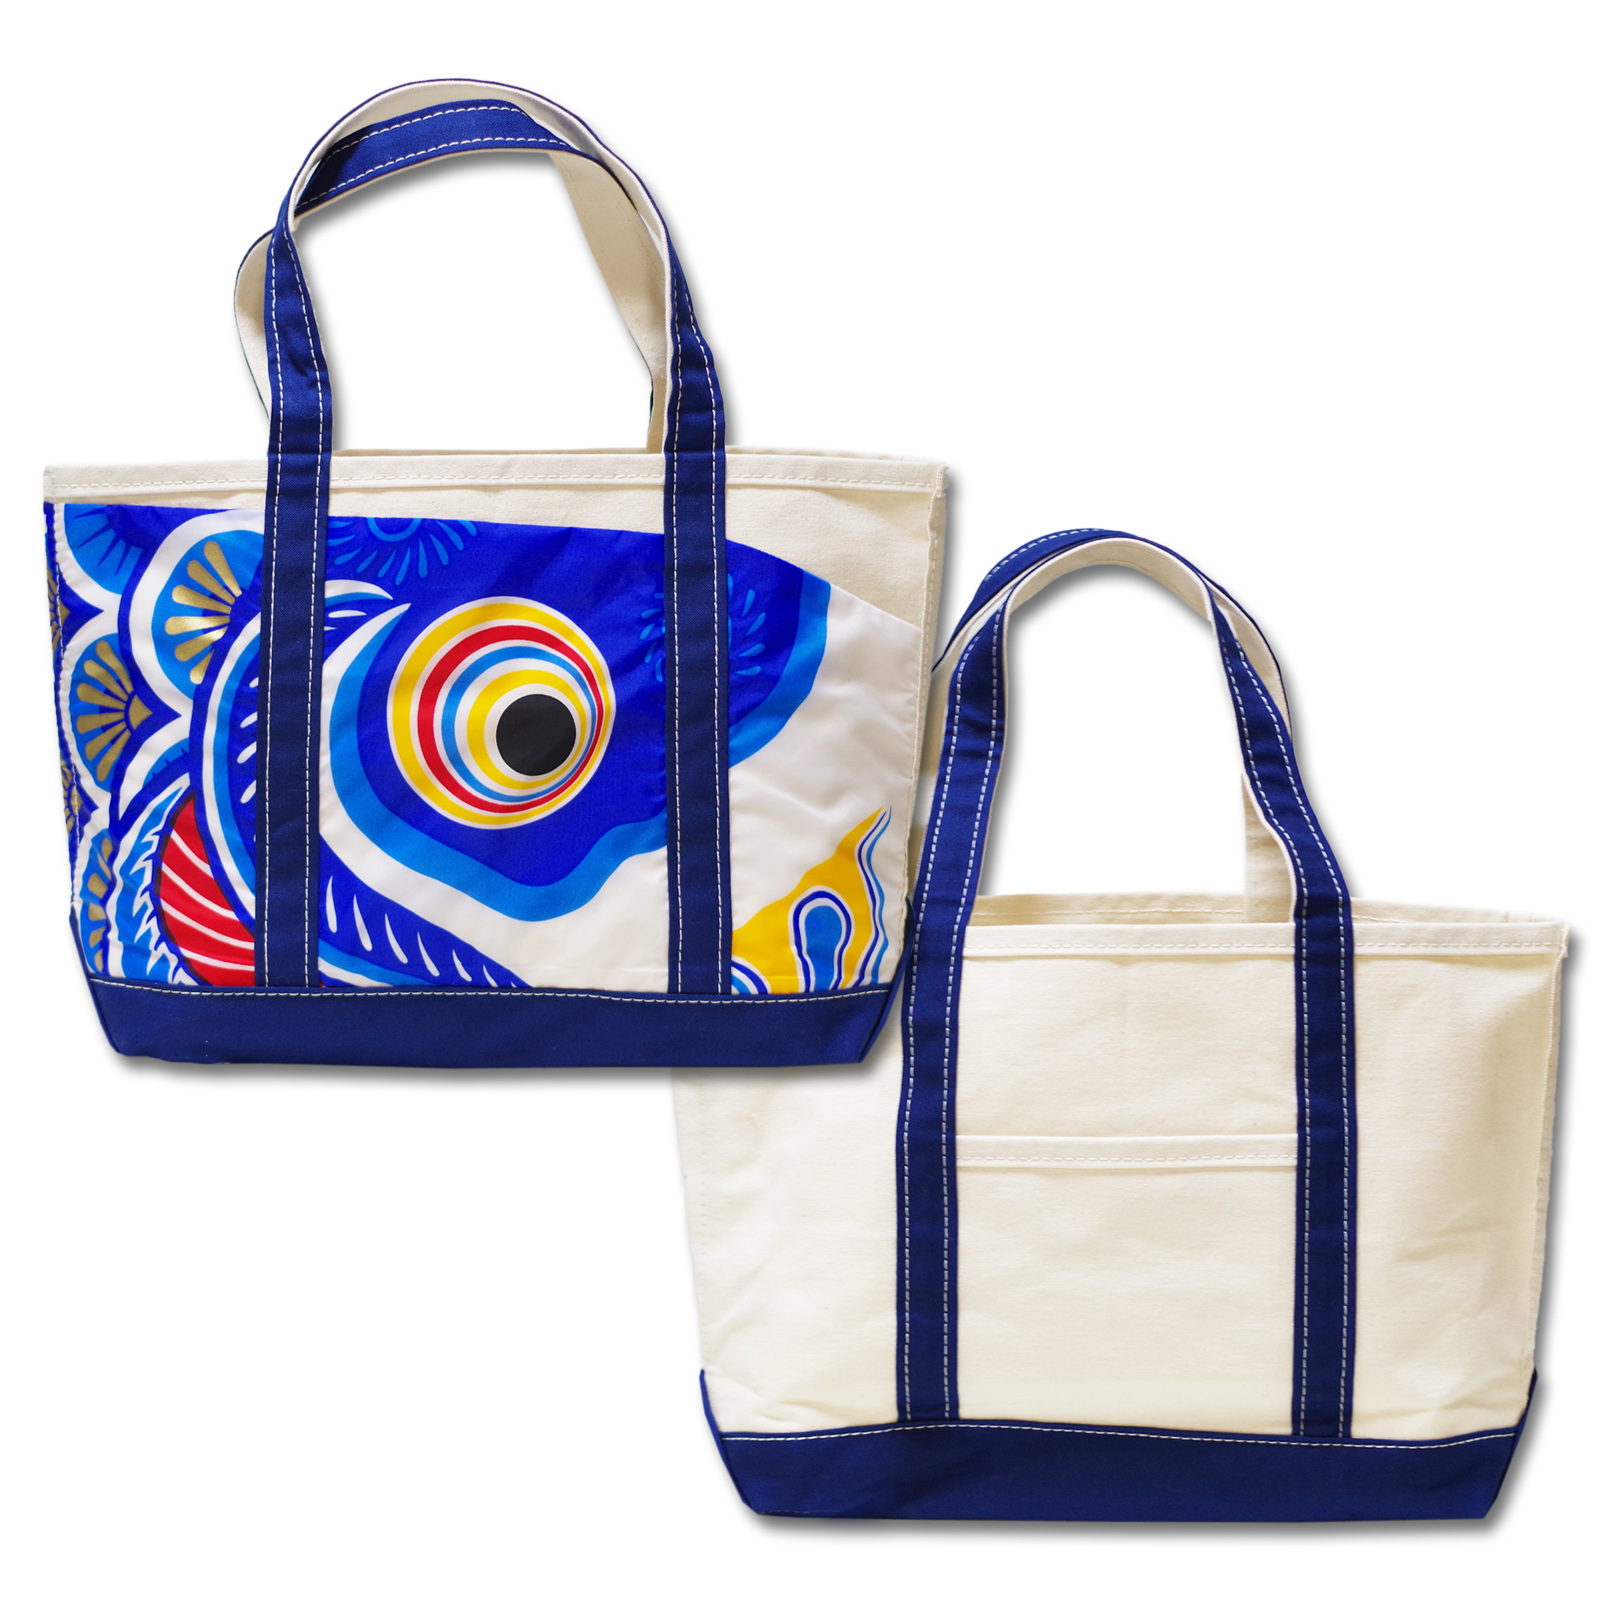 Tote Bag Blue Large Size Right Facing